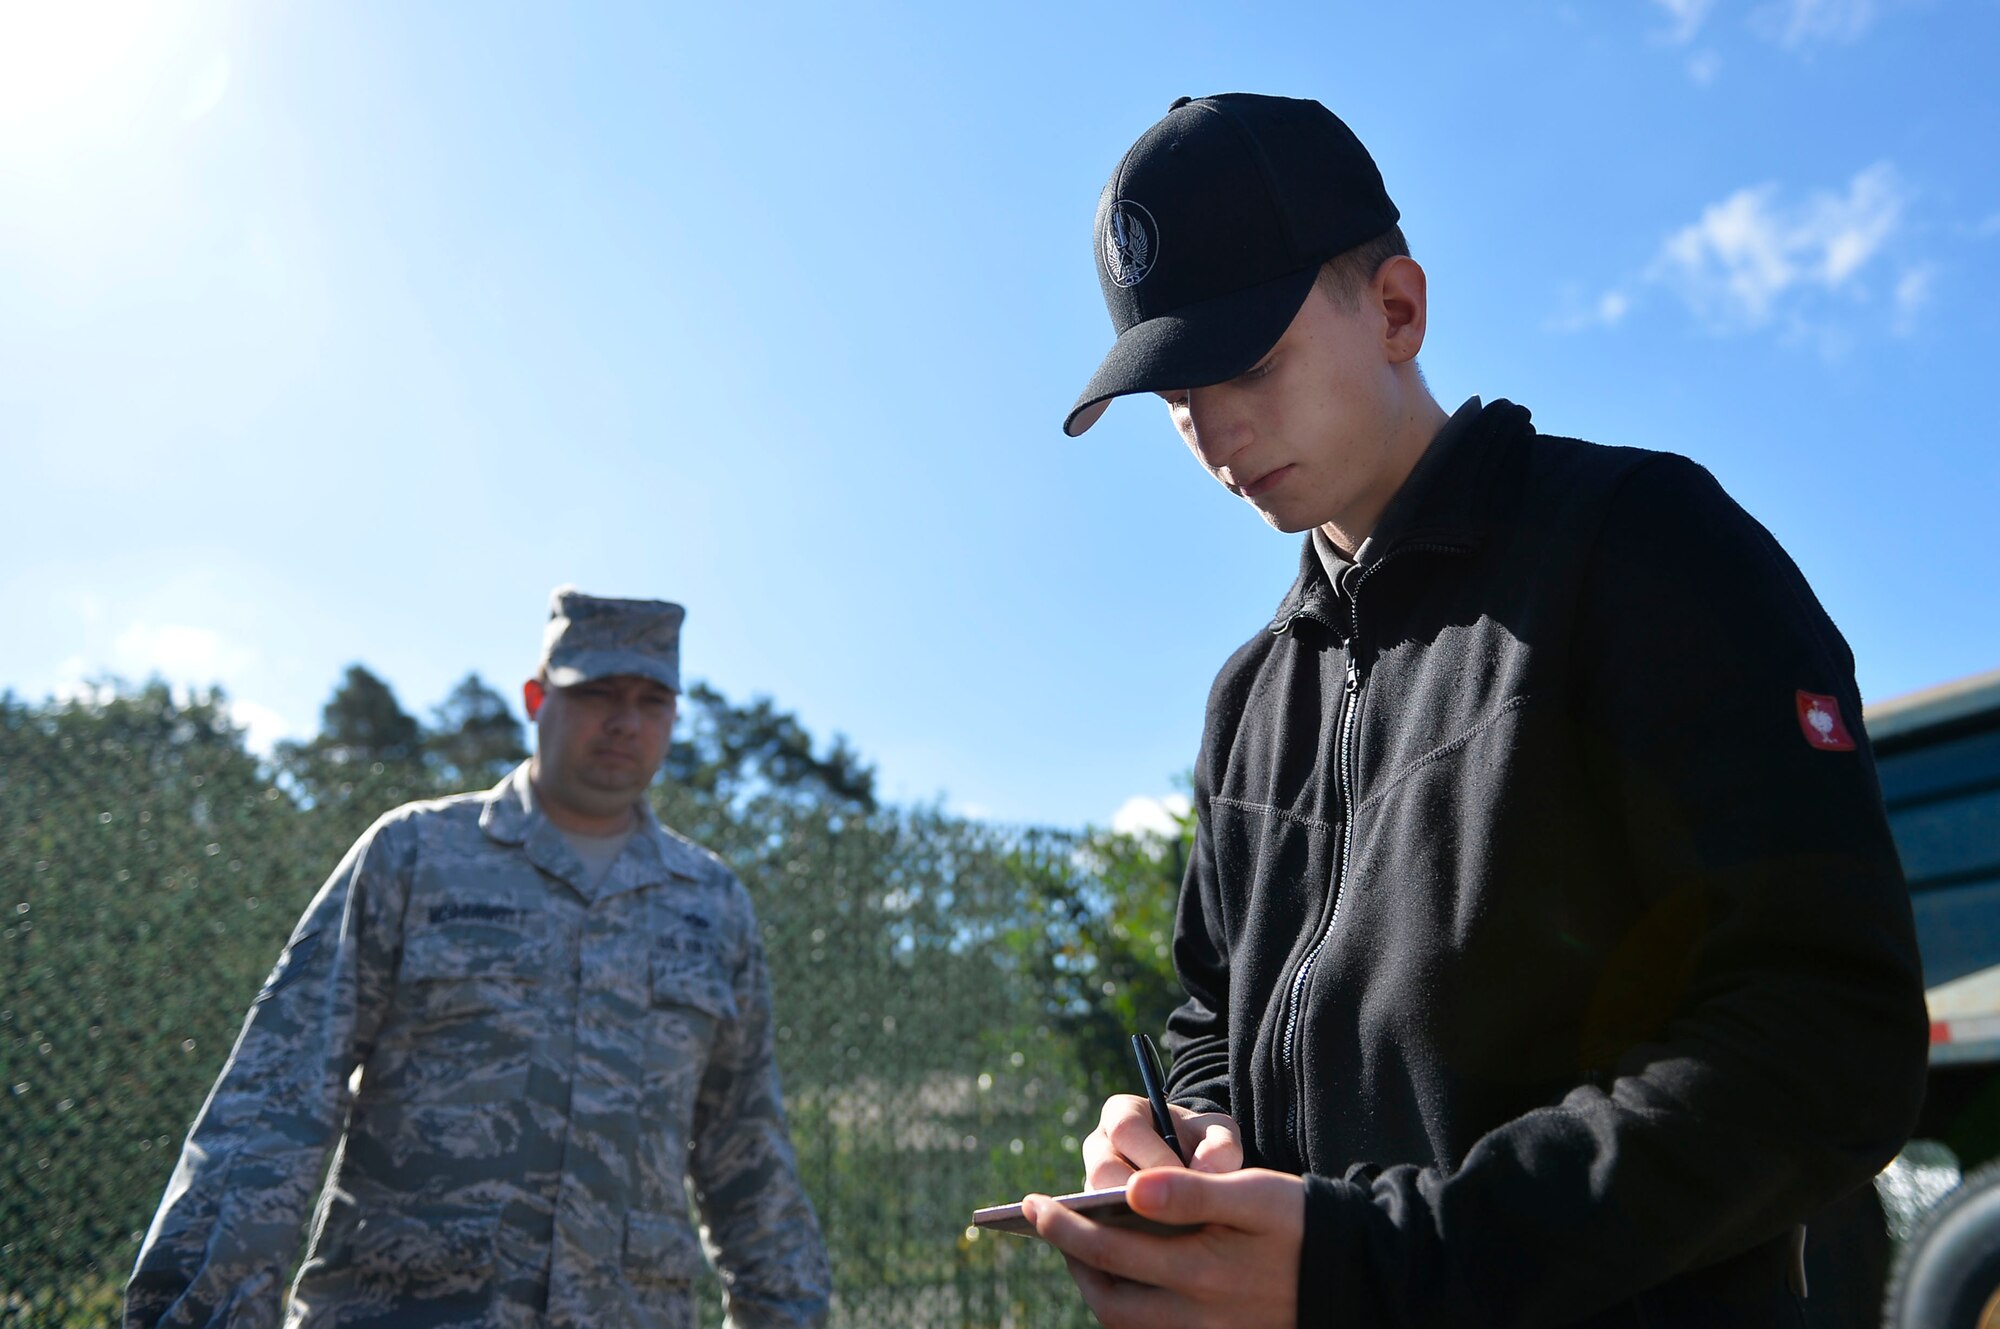 Felix Myer, 435th Construction and Training Squadron, administrative service clerk apprentice, writes down vehicle parts for purchase, on Ramstein Air Base, Germany, Jul. 13, 2017. The 435th CTS is conducting an apprenticeship training program for local national youth. (U.S. Air Force photo by Airman 1st Class Joshua Magbanua)